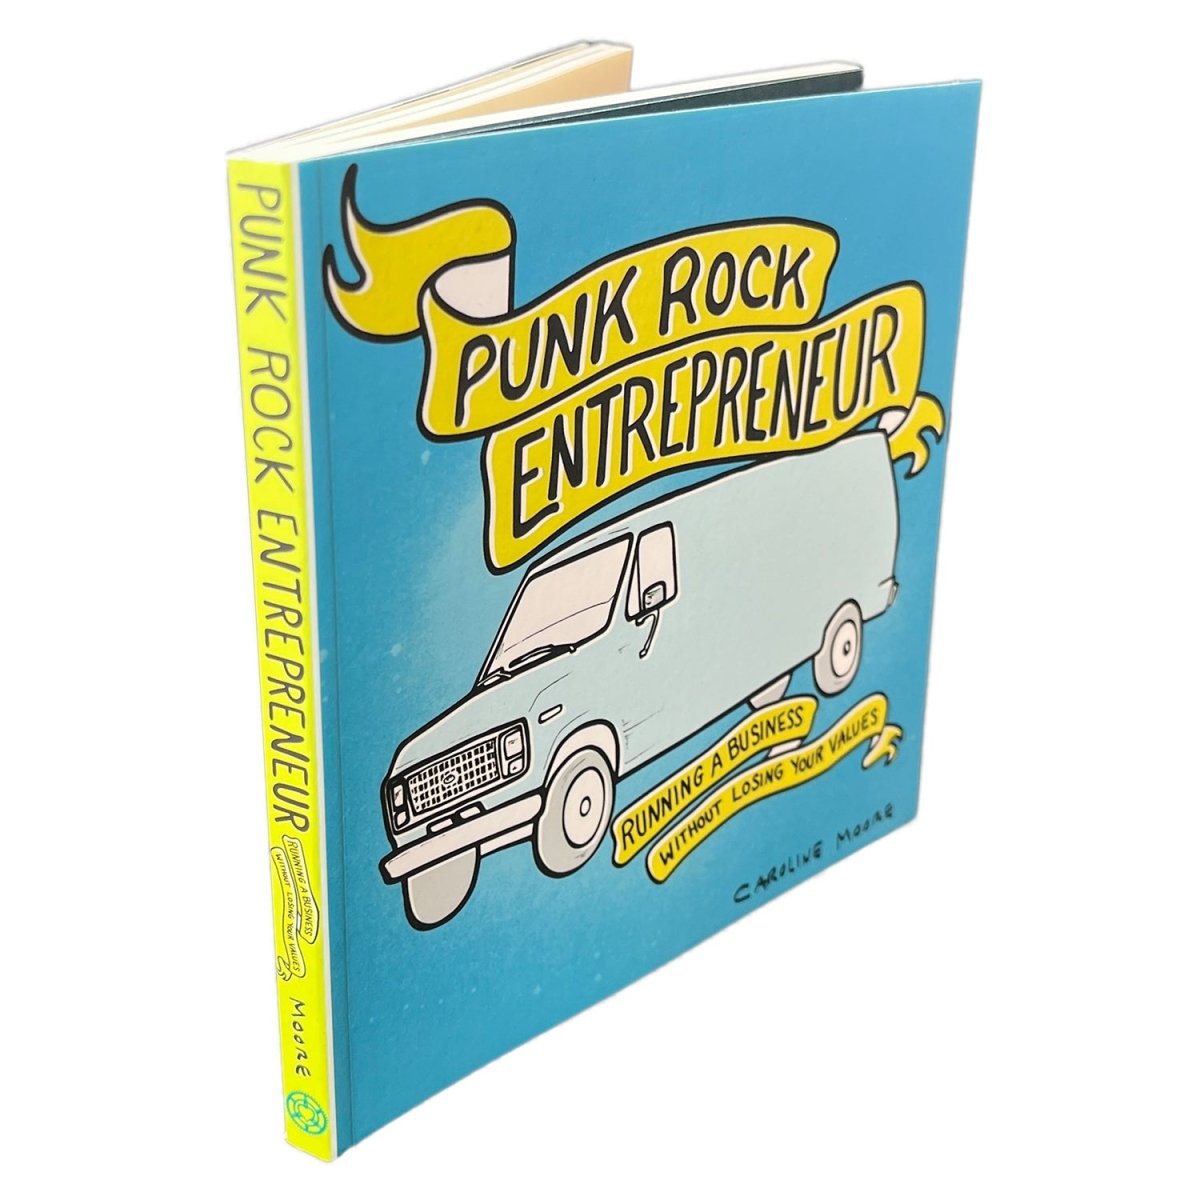 Too Fast | Punk Rock Entrepreneur: Running a Business Without Losing Your Values